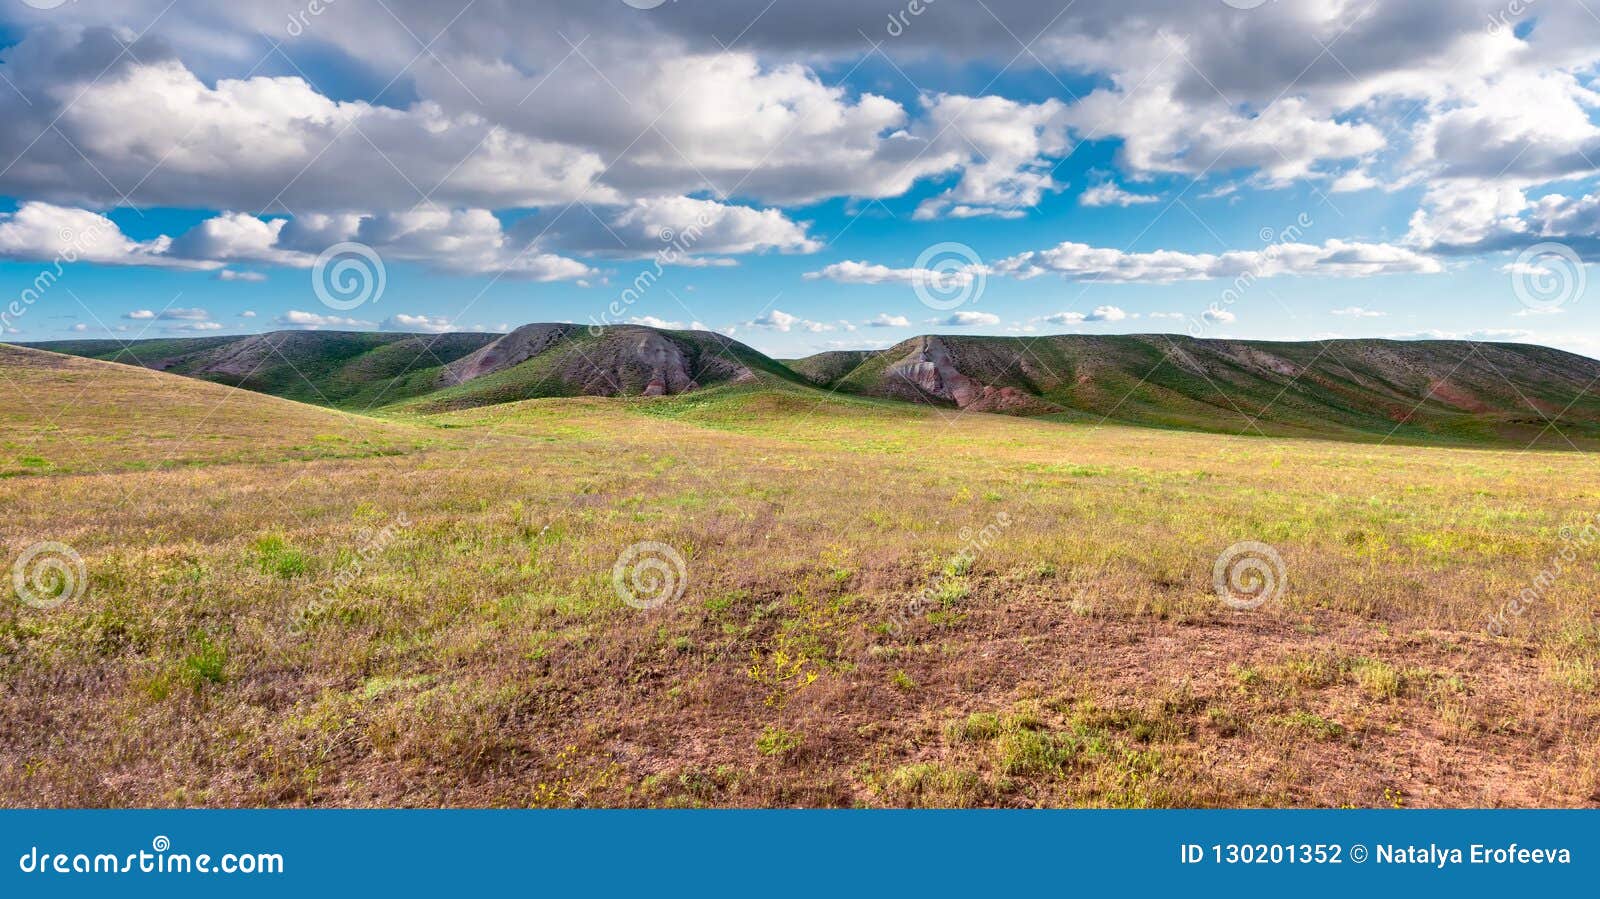 panorama hills in sunny day. vista scenic idylic landscape hills sun through the clouds meadow